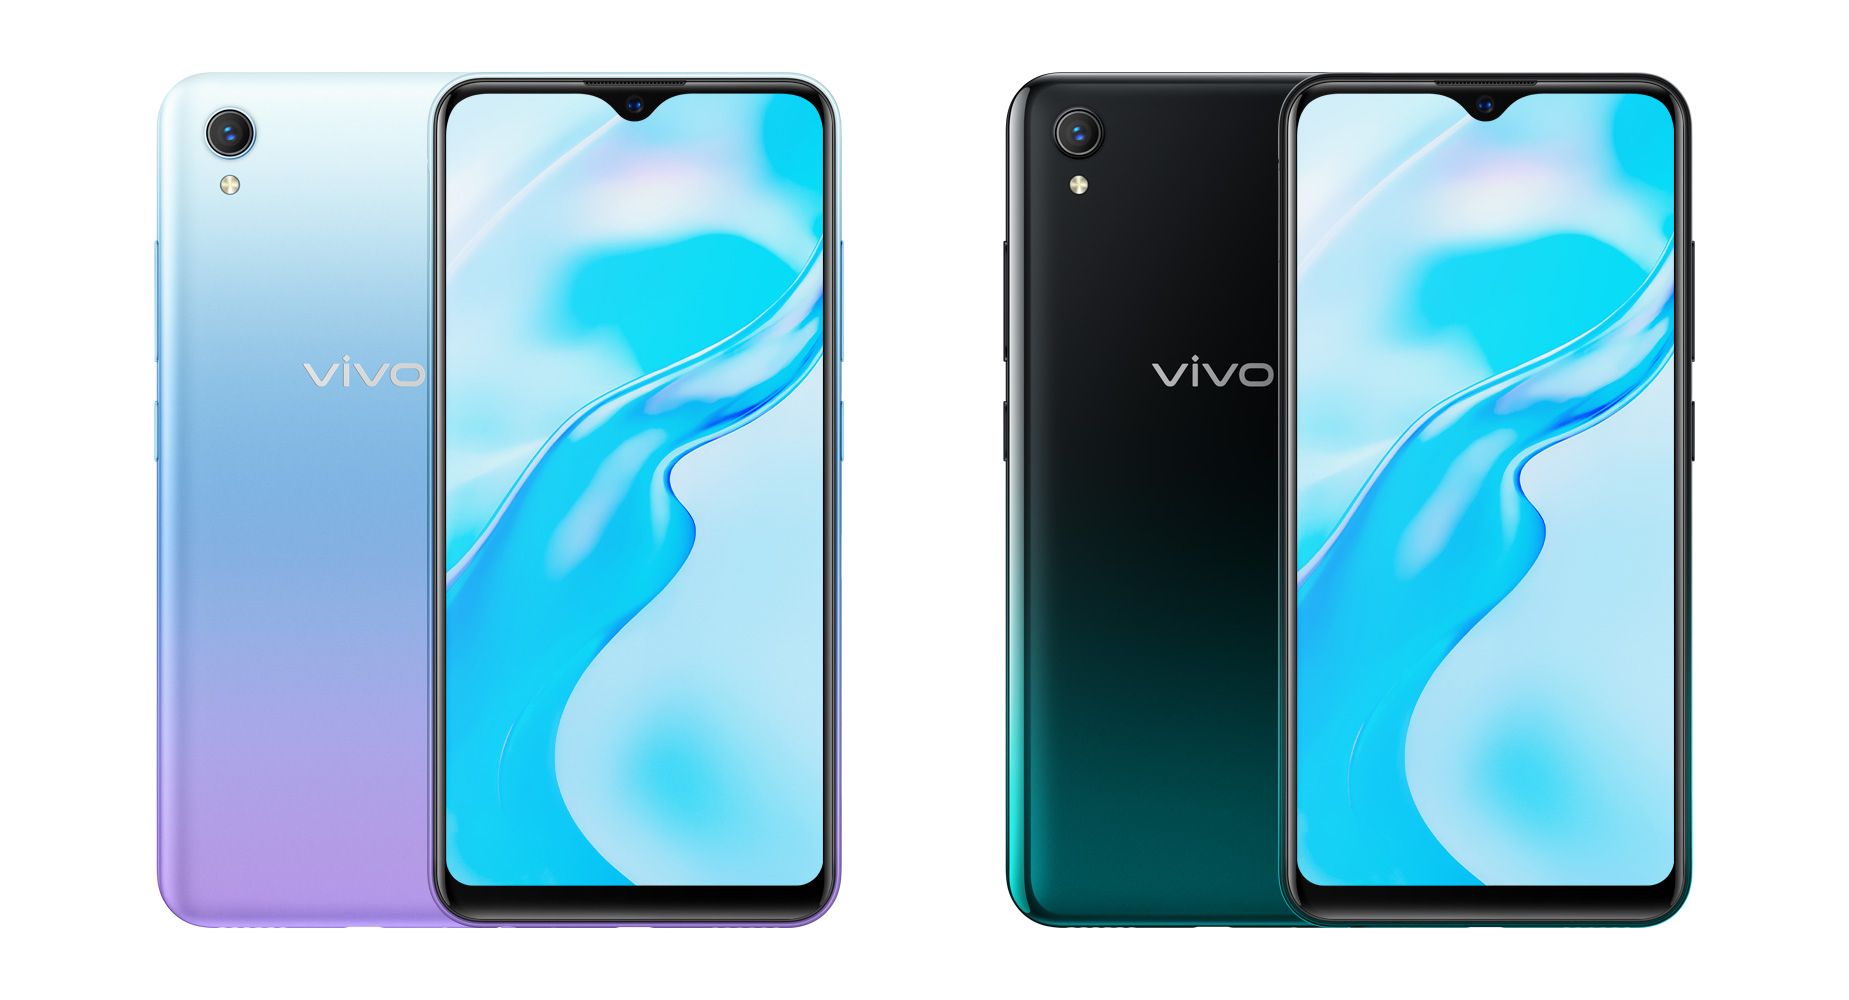 Vivo Y1s with 6.22-inch display, Helio P35 and 4,030mAh battery launched in Cambodia